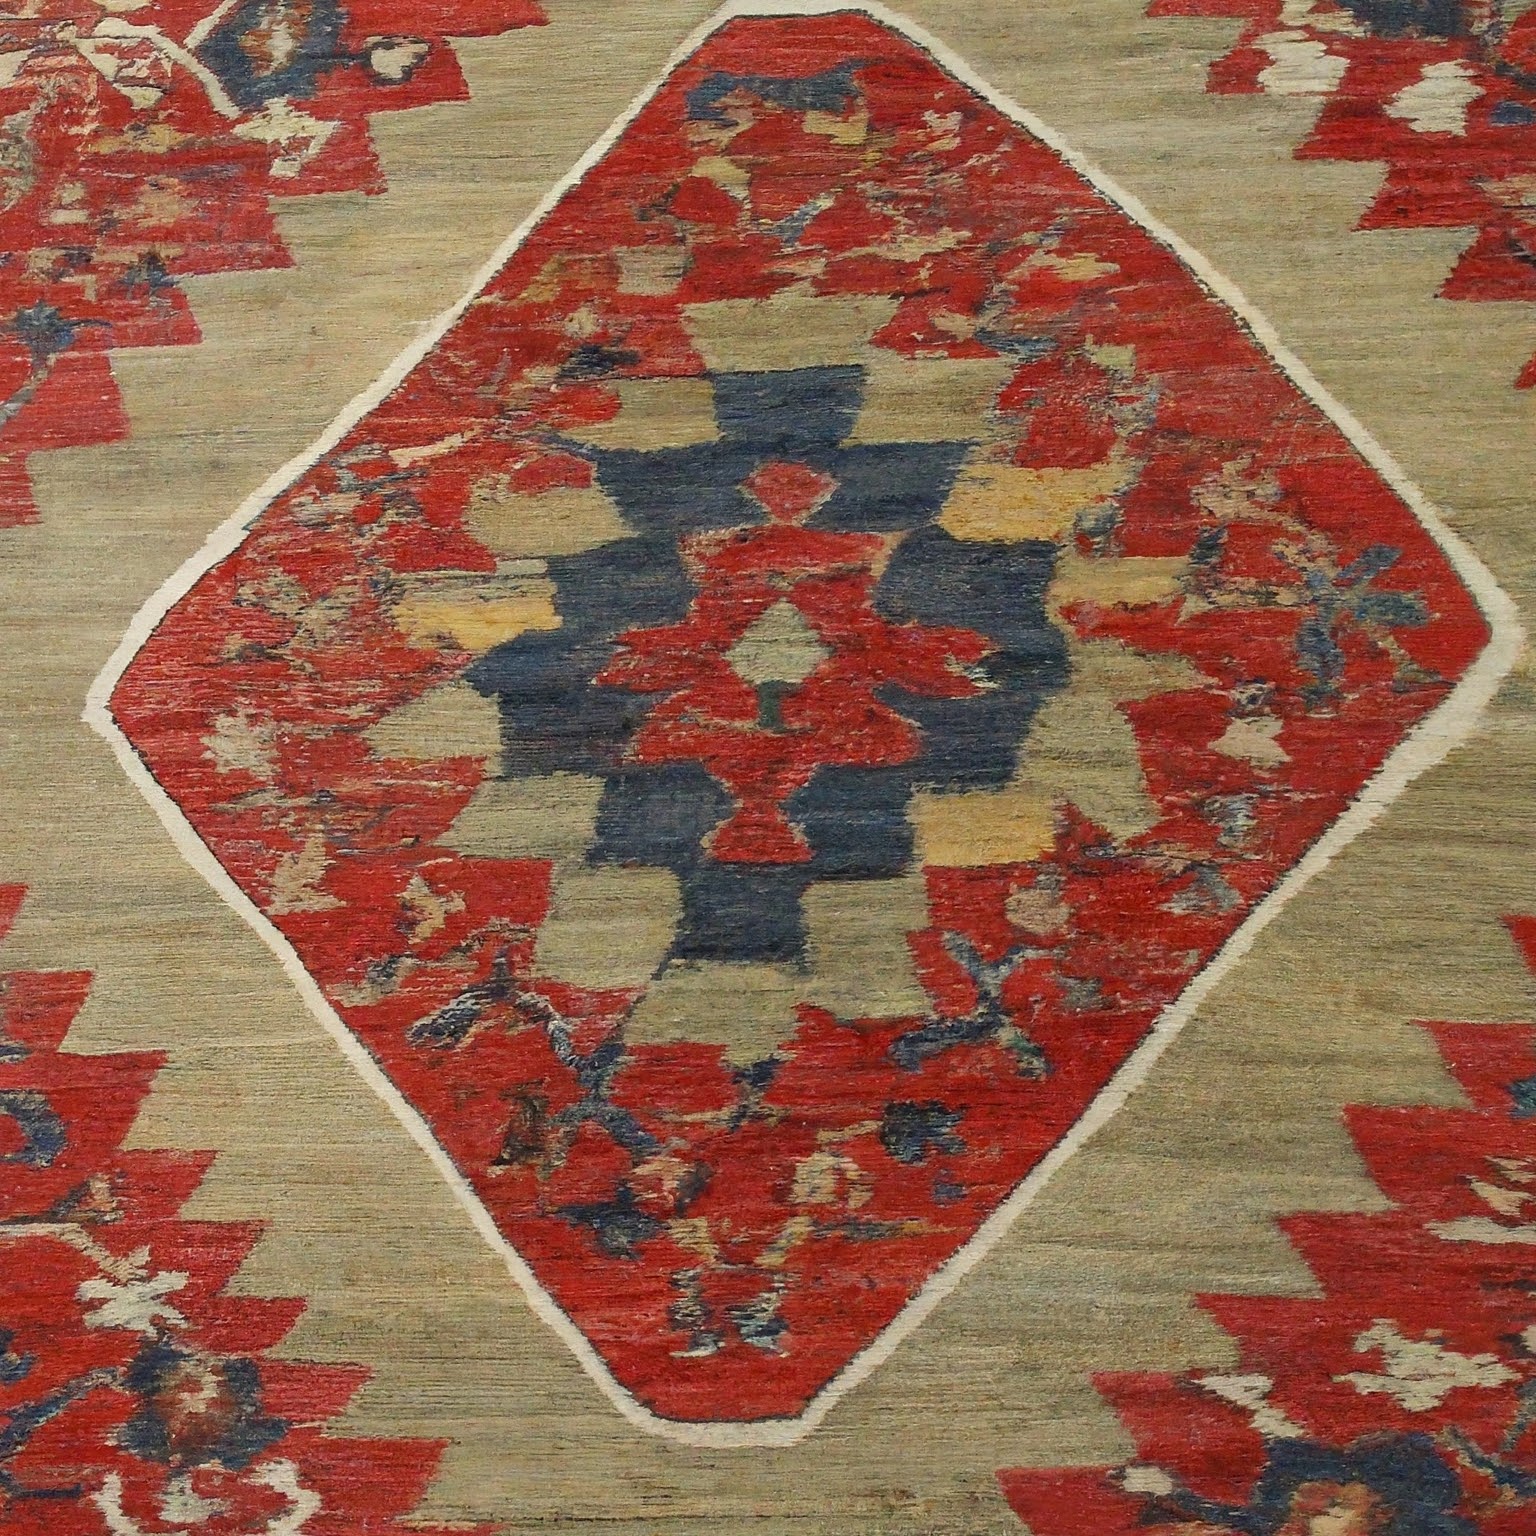 Carpet 4 from RugRealm